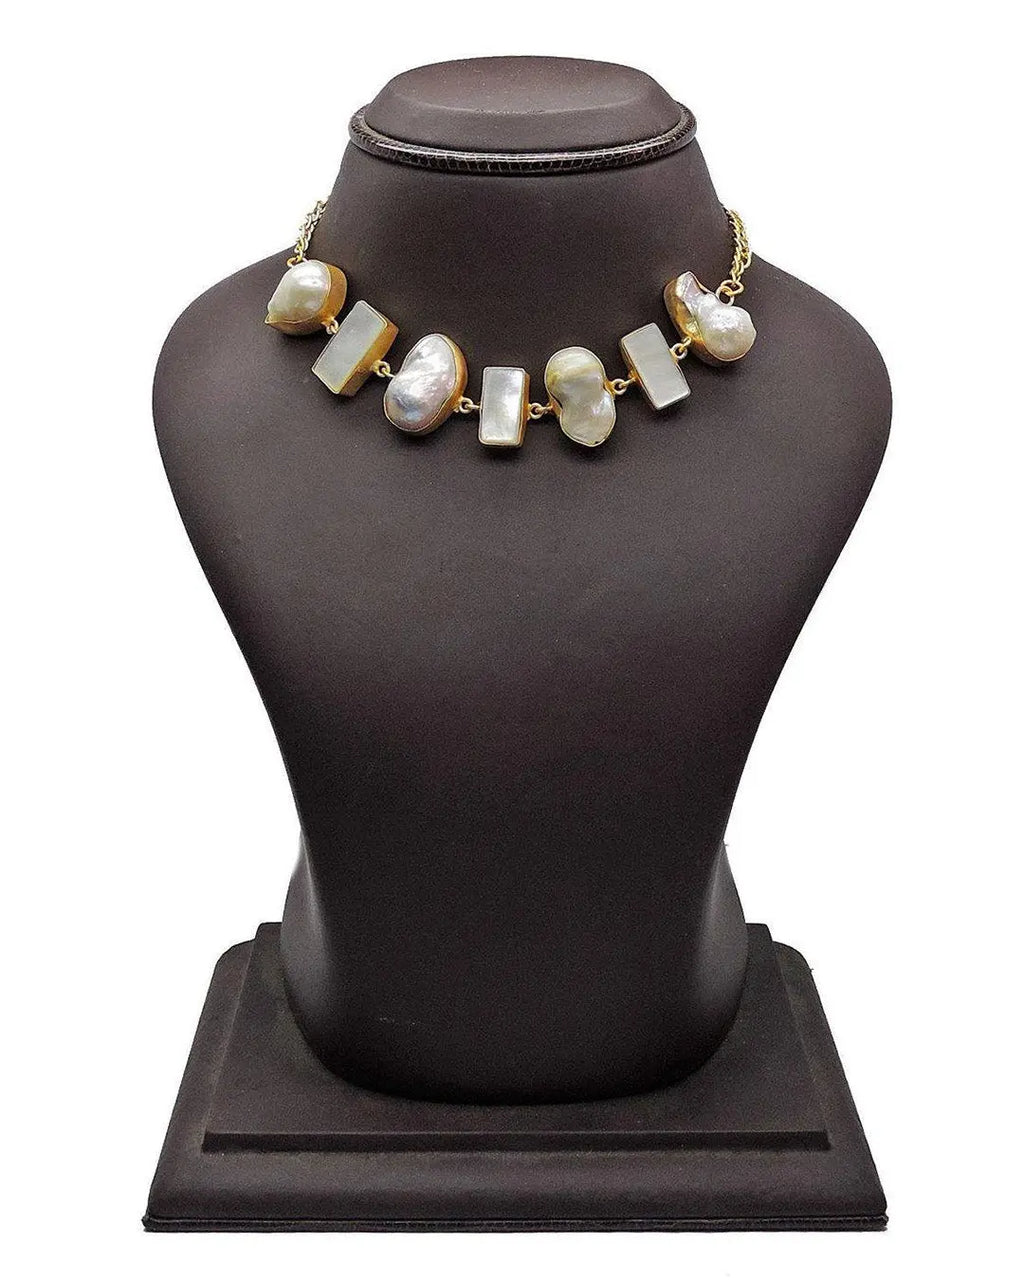 White Story Necklace- Handcrafted Jewellery from Dori